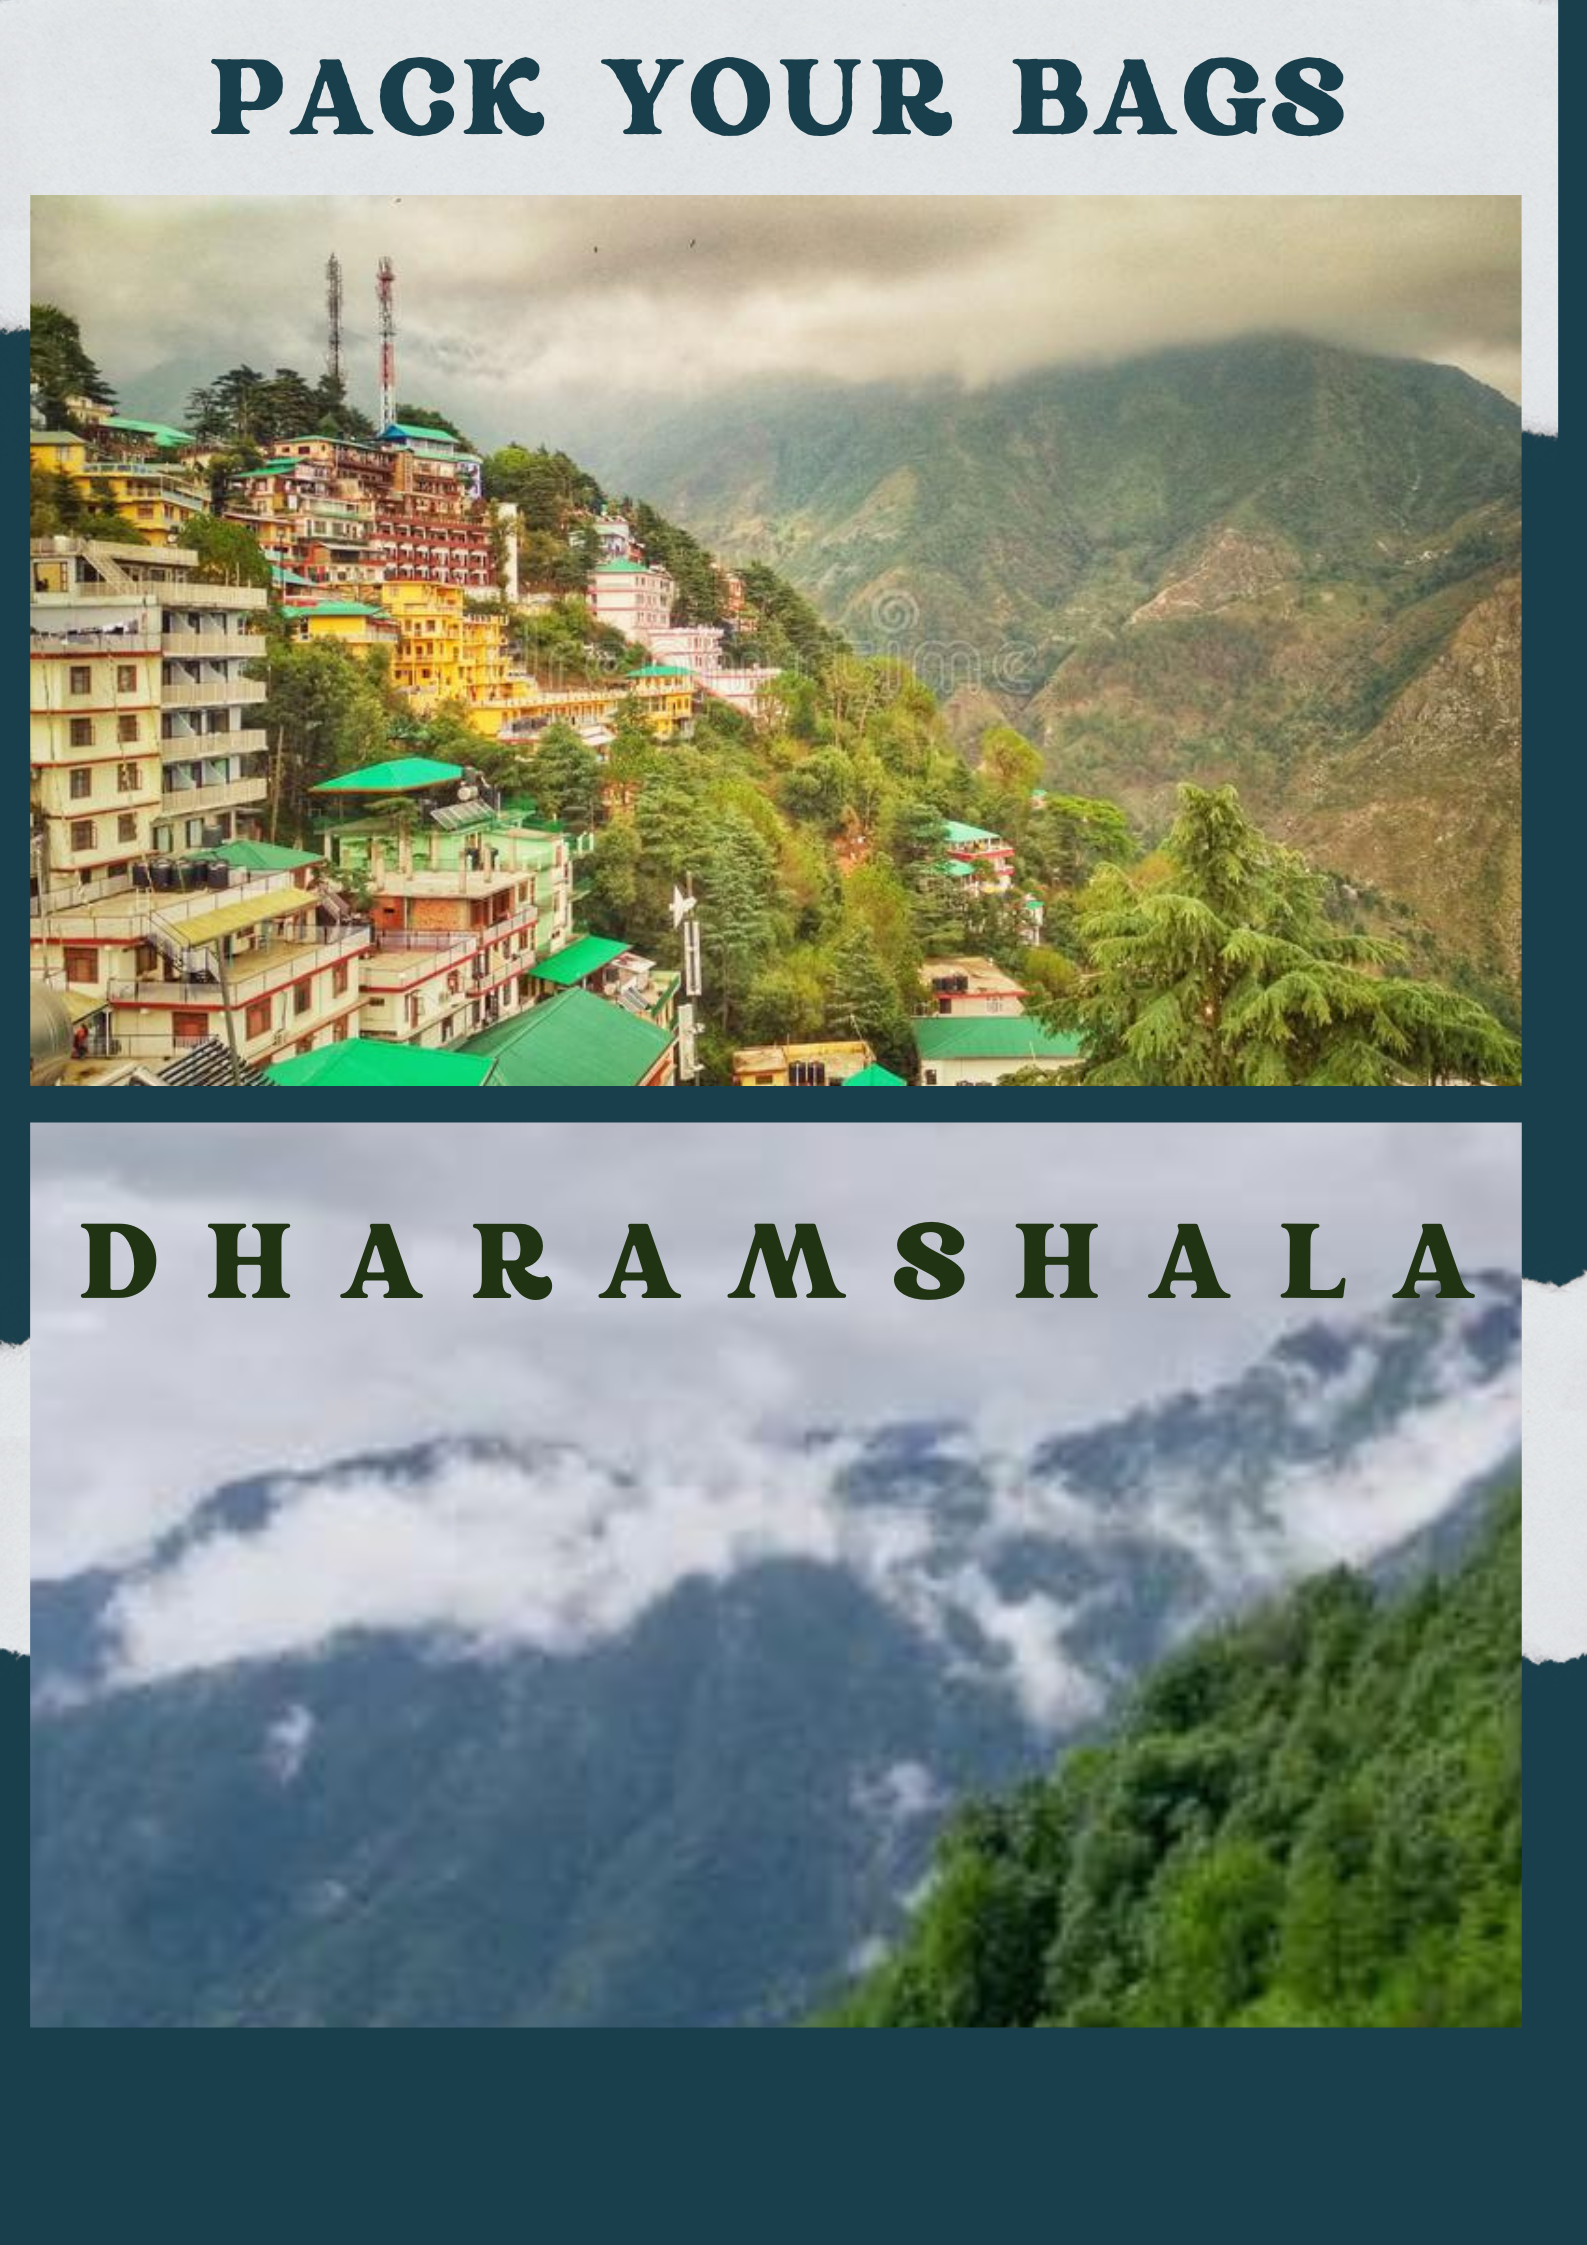 Pack your bags "Dharamshala"